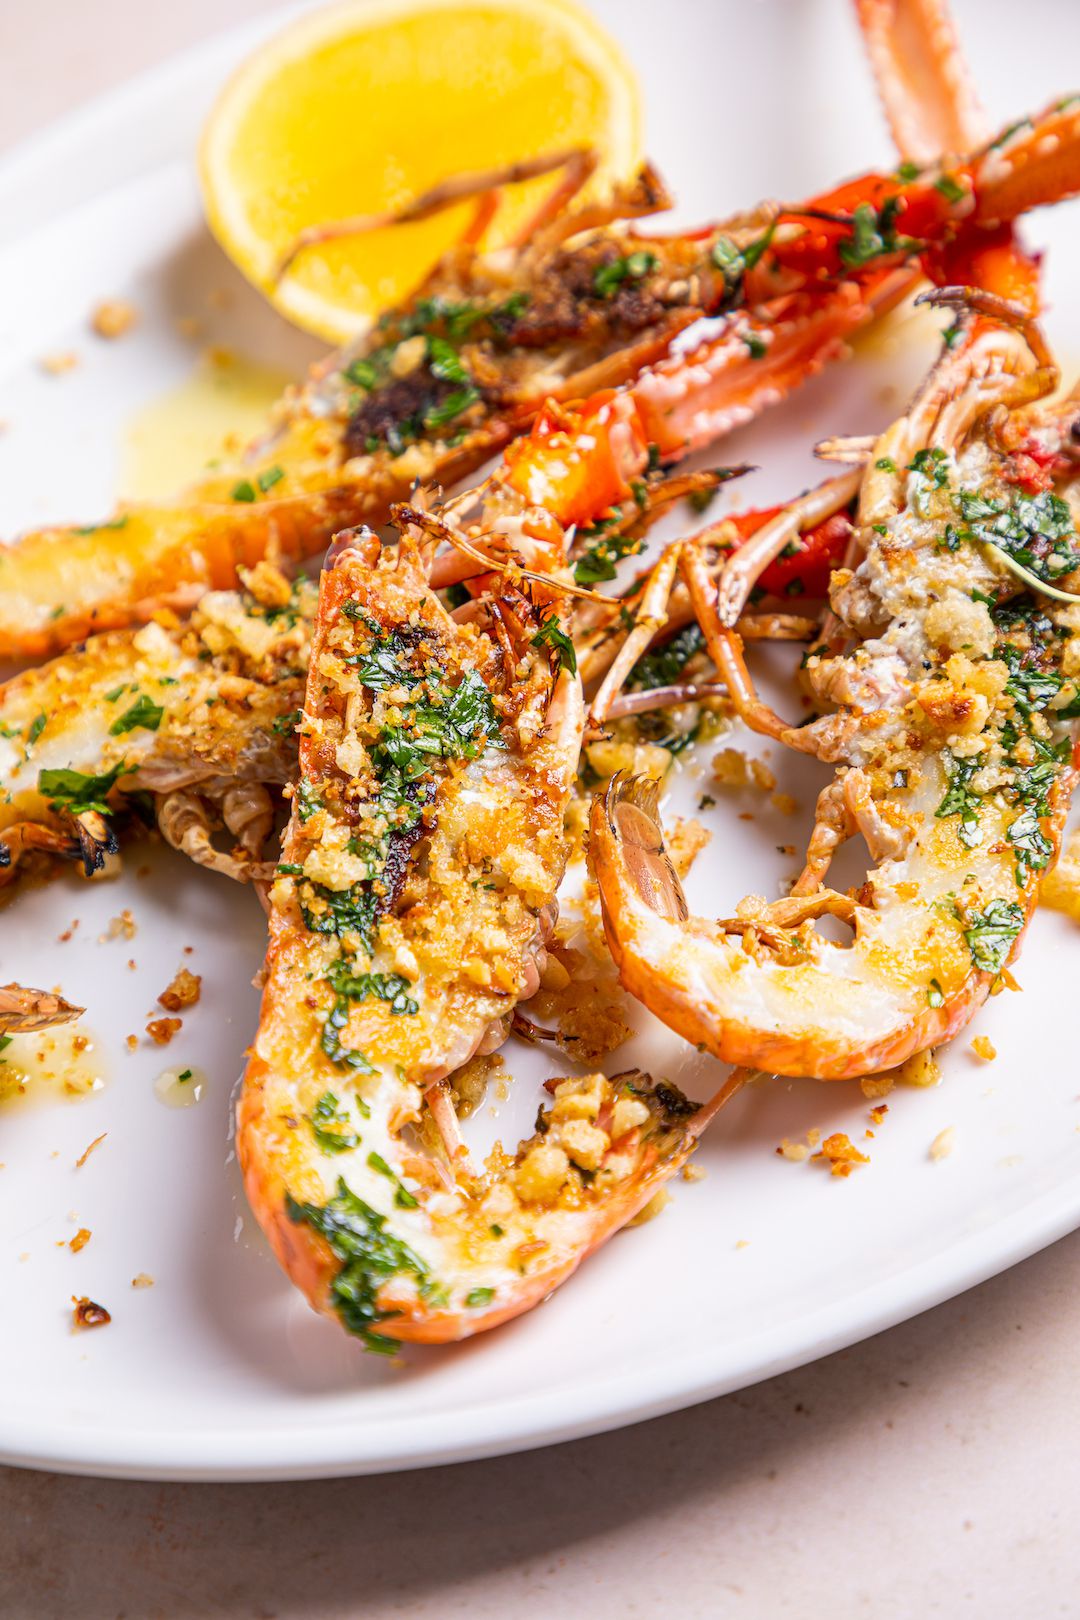 Lemon-grilled langoustines, the kind of dish Saborcito diners can expect.